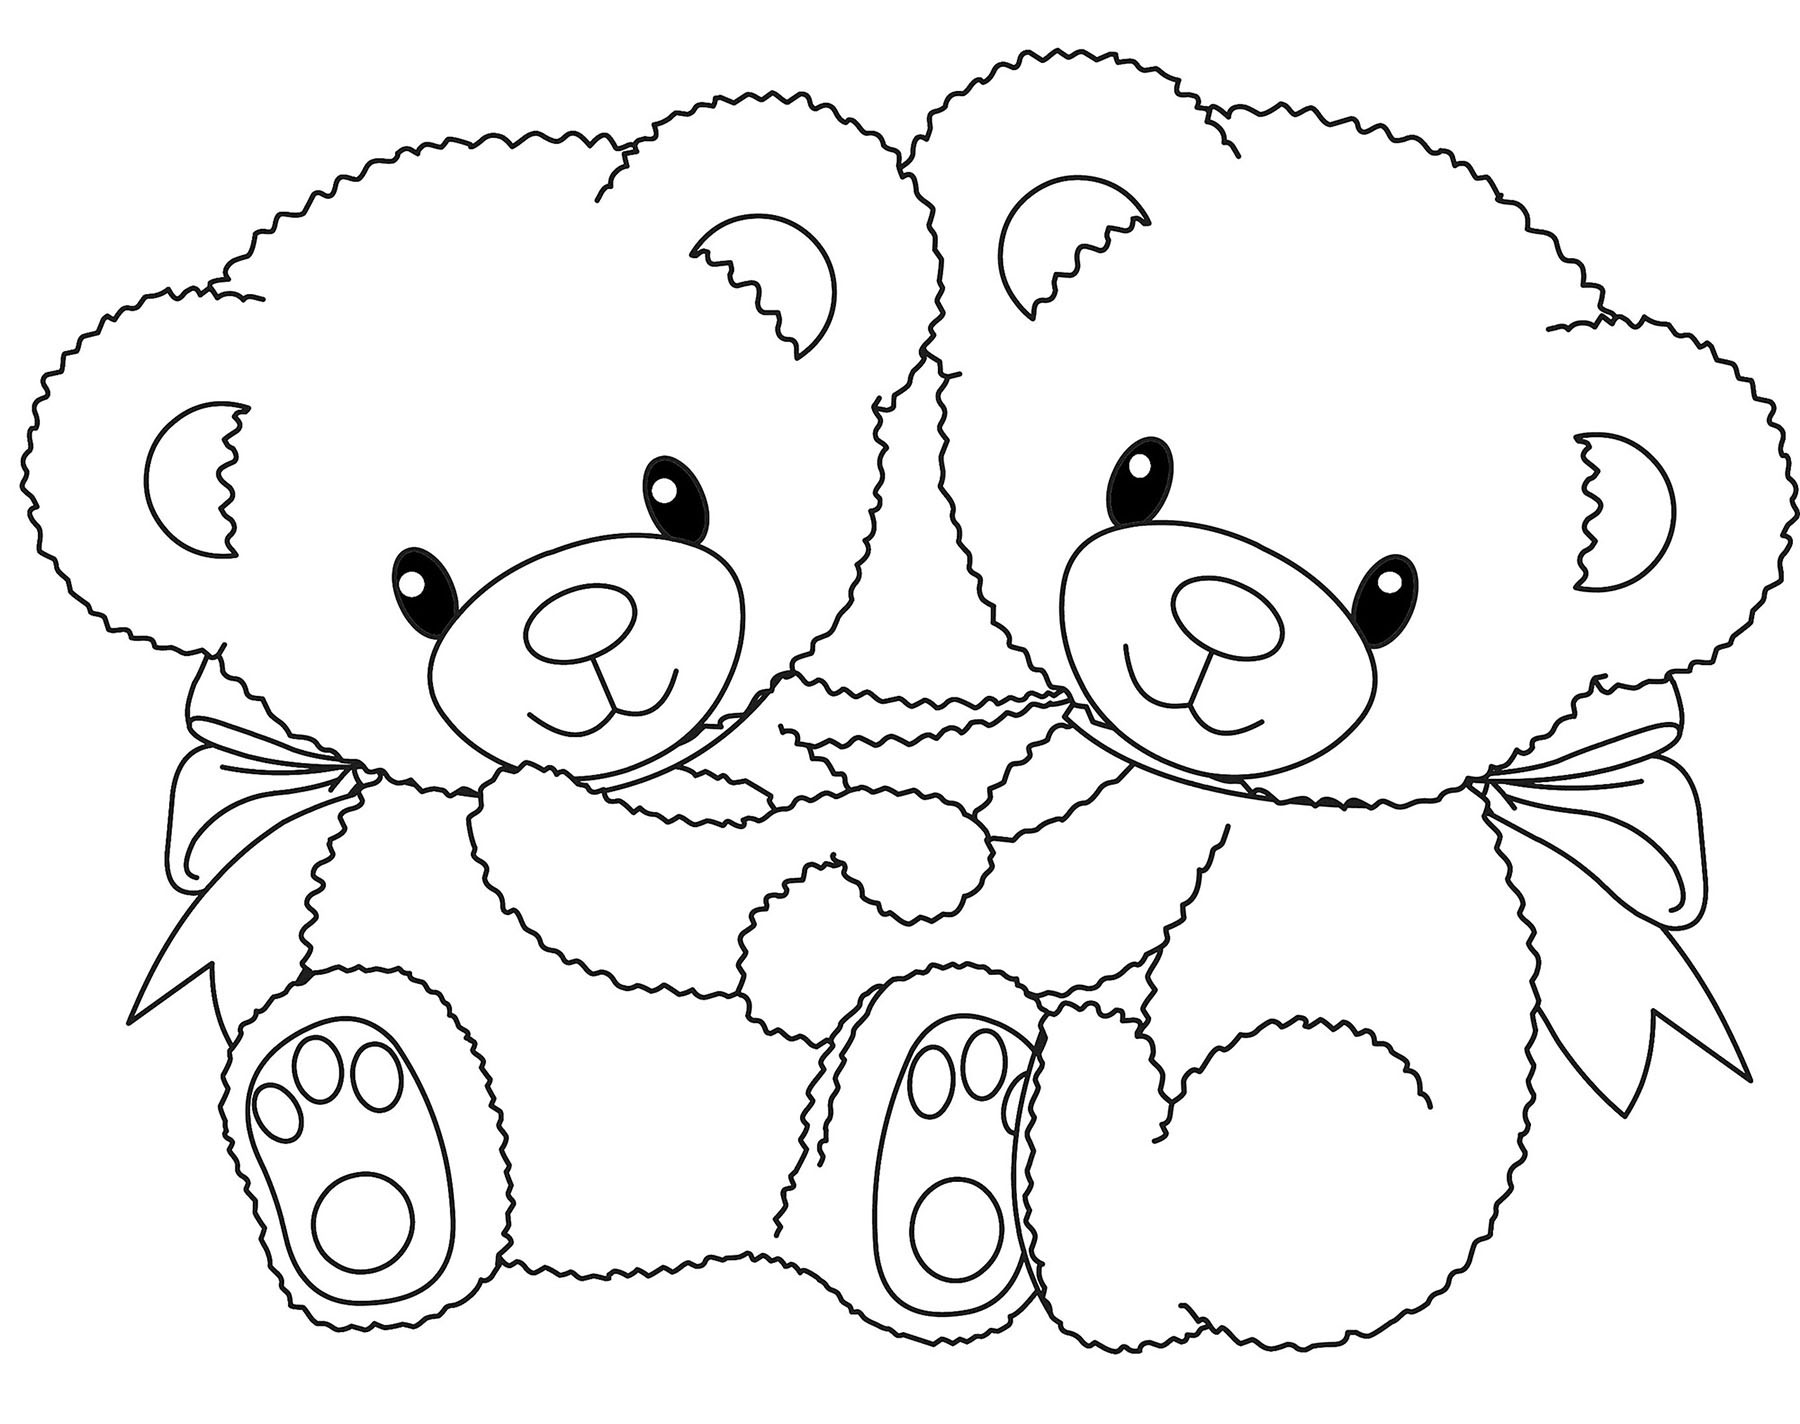 Coloring of two little bears!